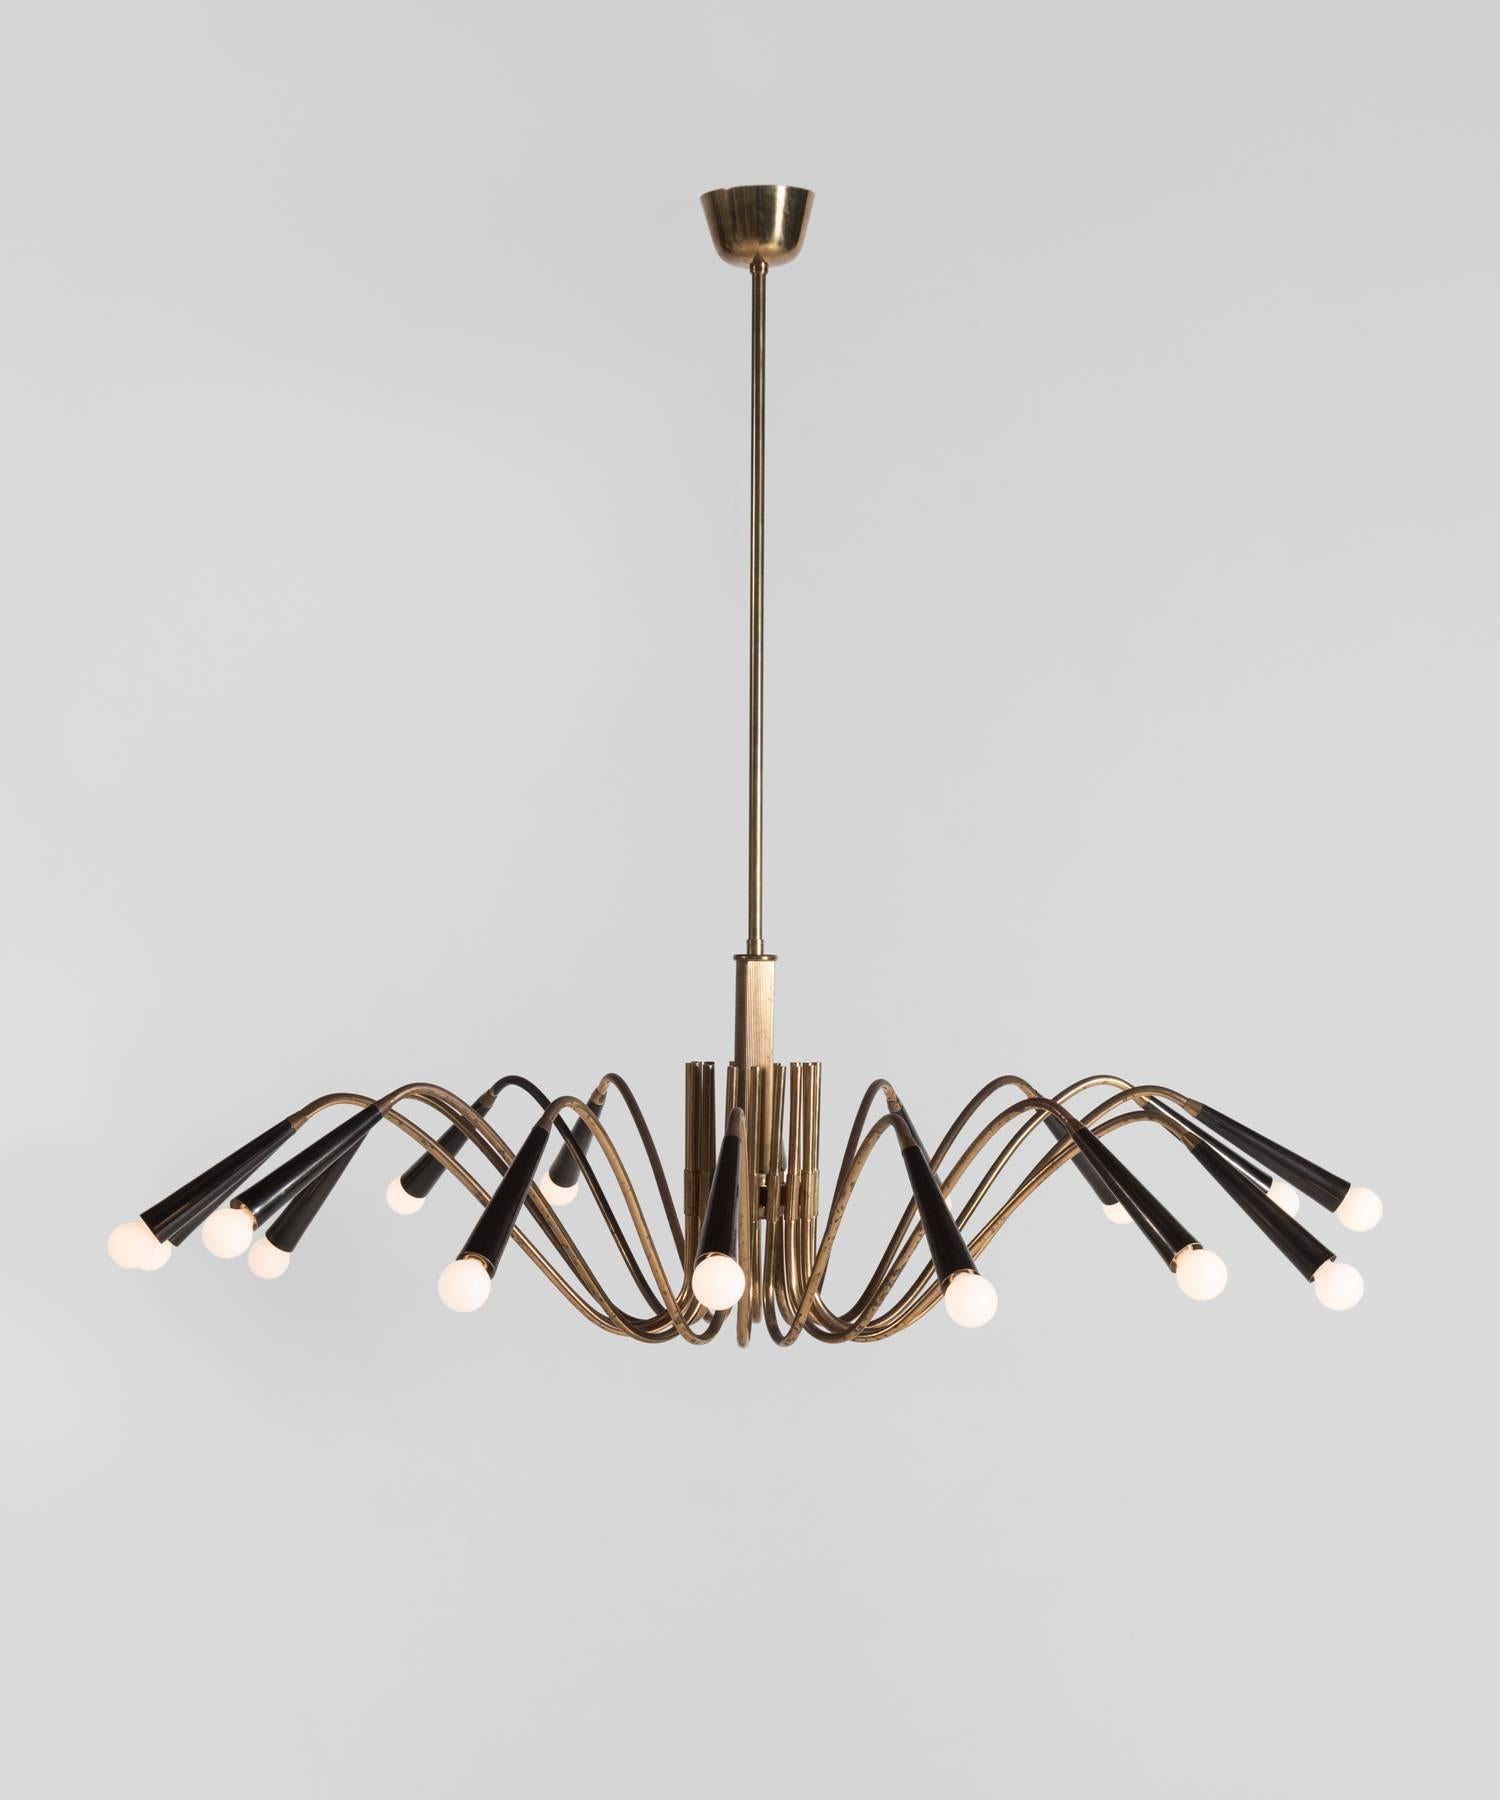 Elegant Italian chandelier with painted black metal shades.

Made in Italy, circa 1950.